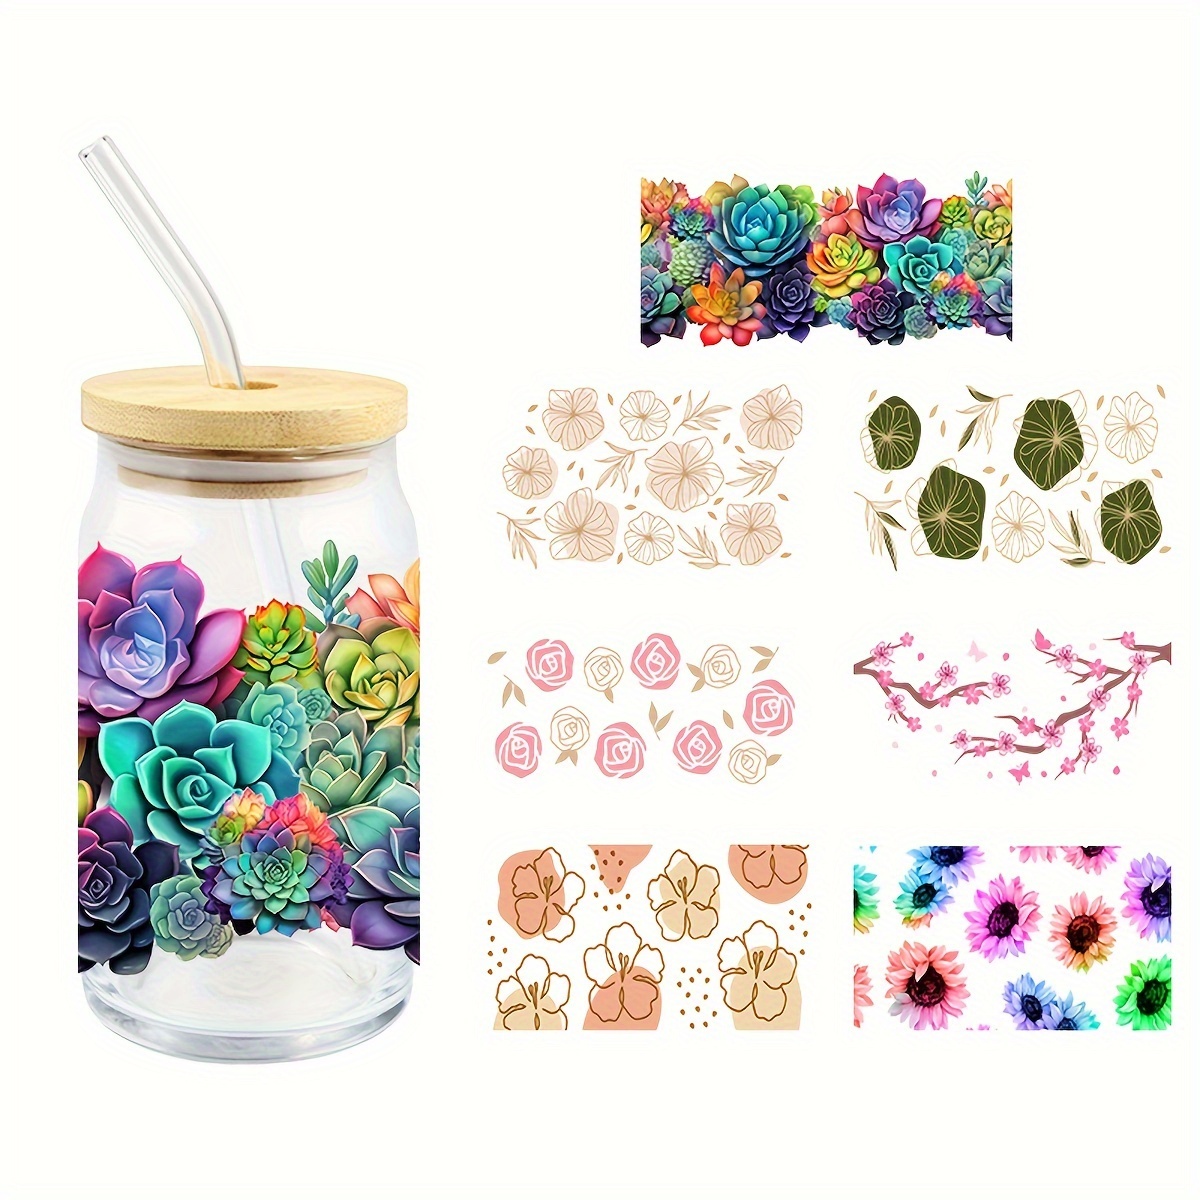 Waterproof and high-temperature resistant decorative stickers for glass cups